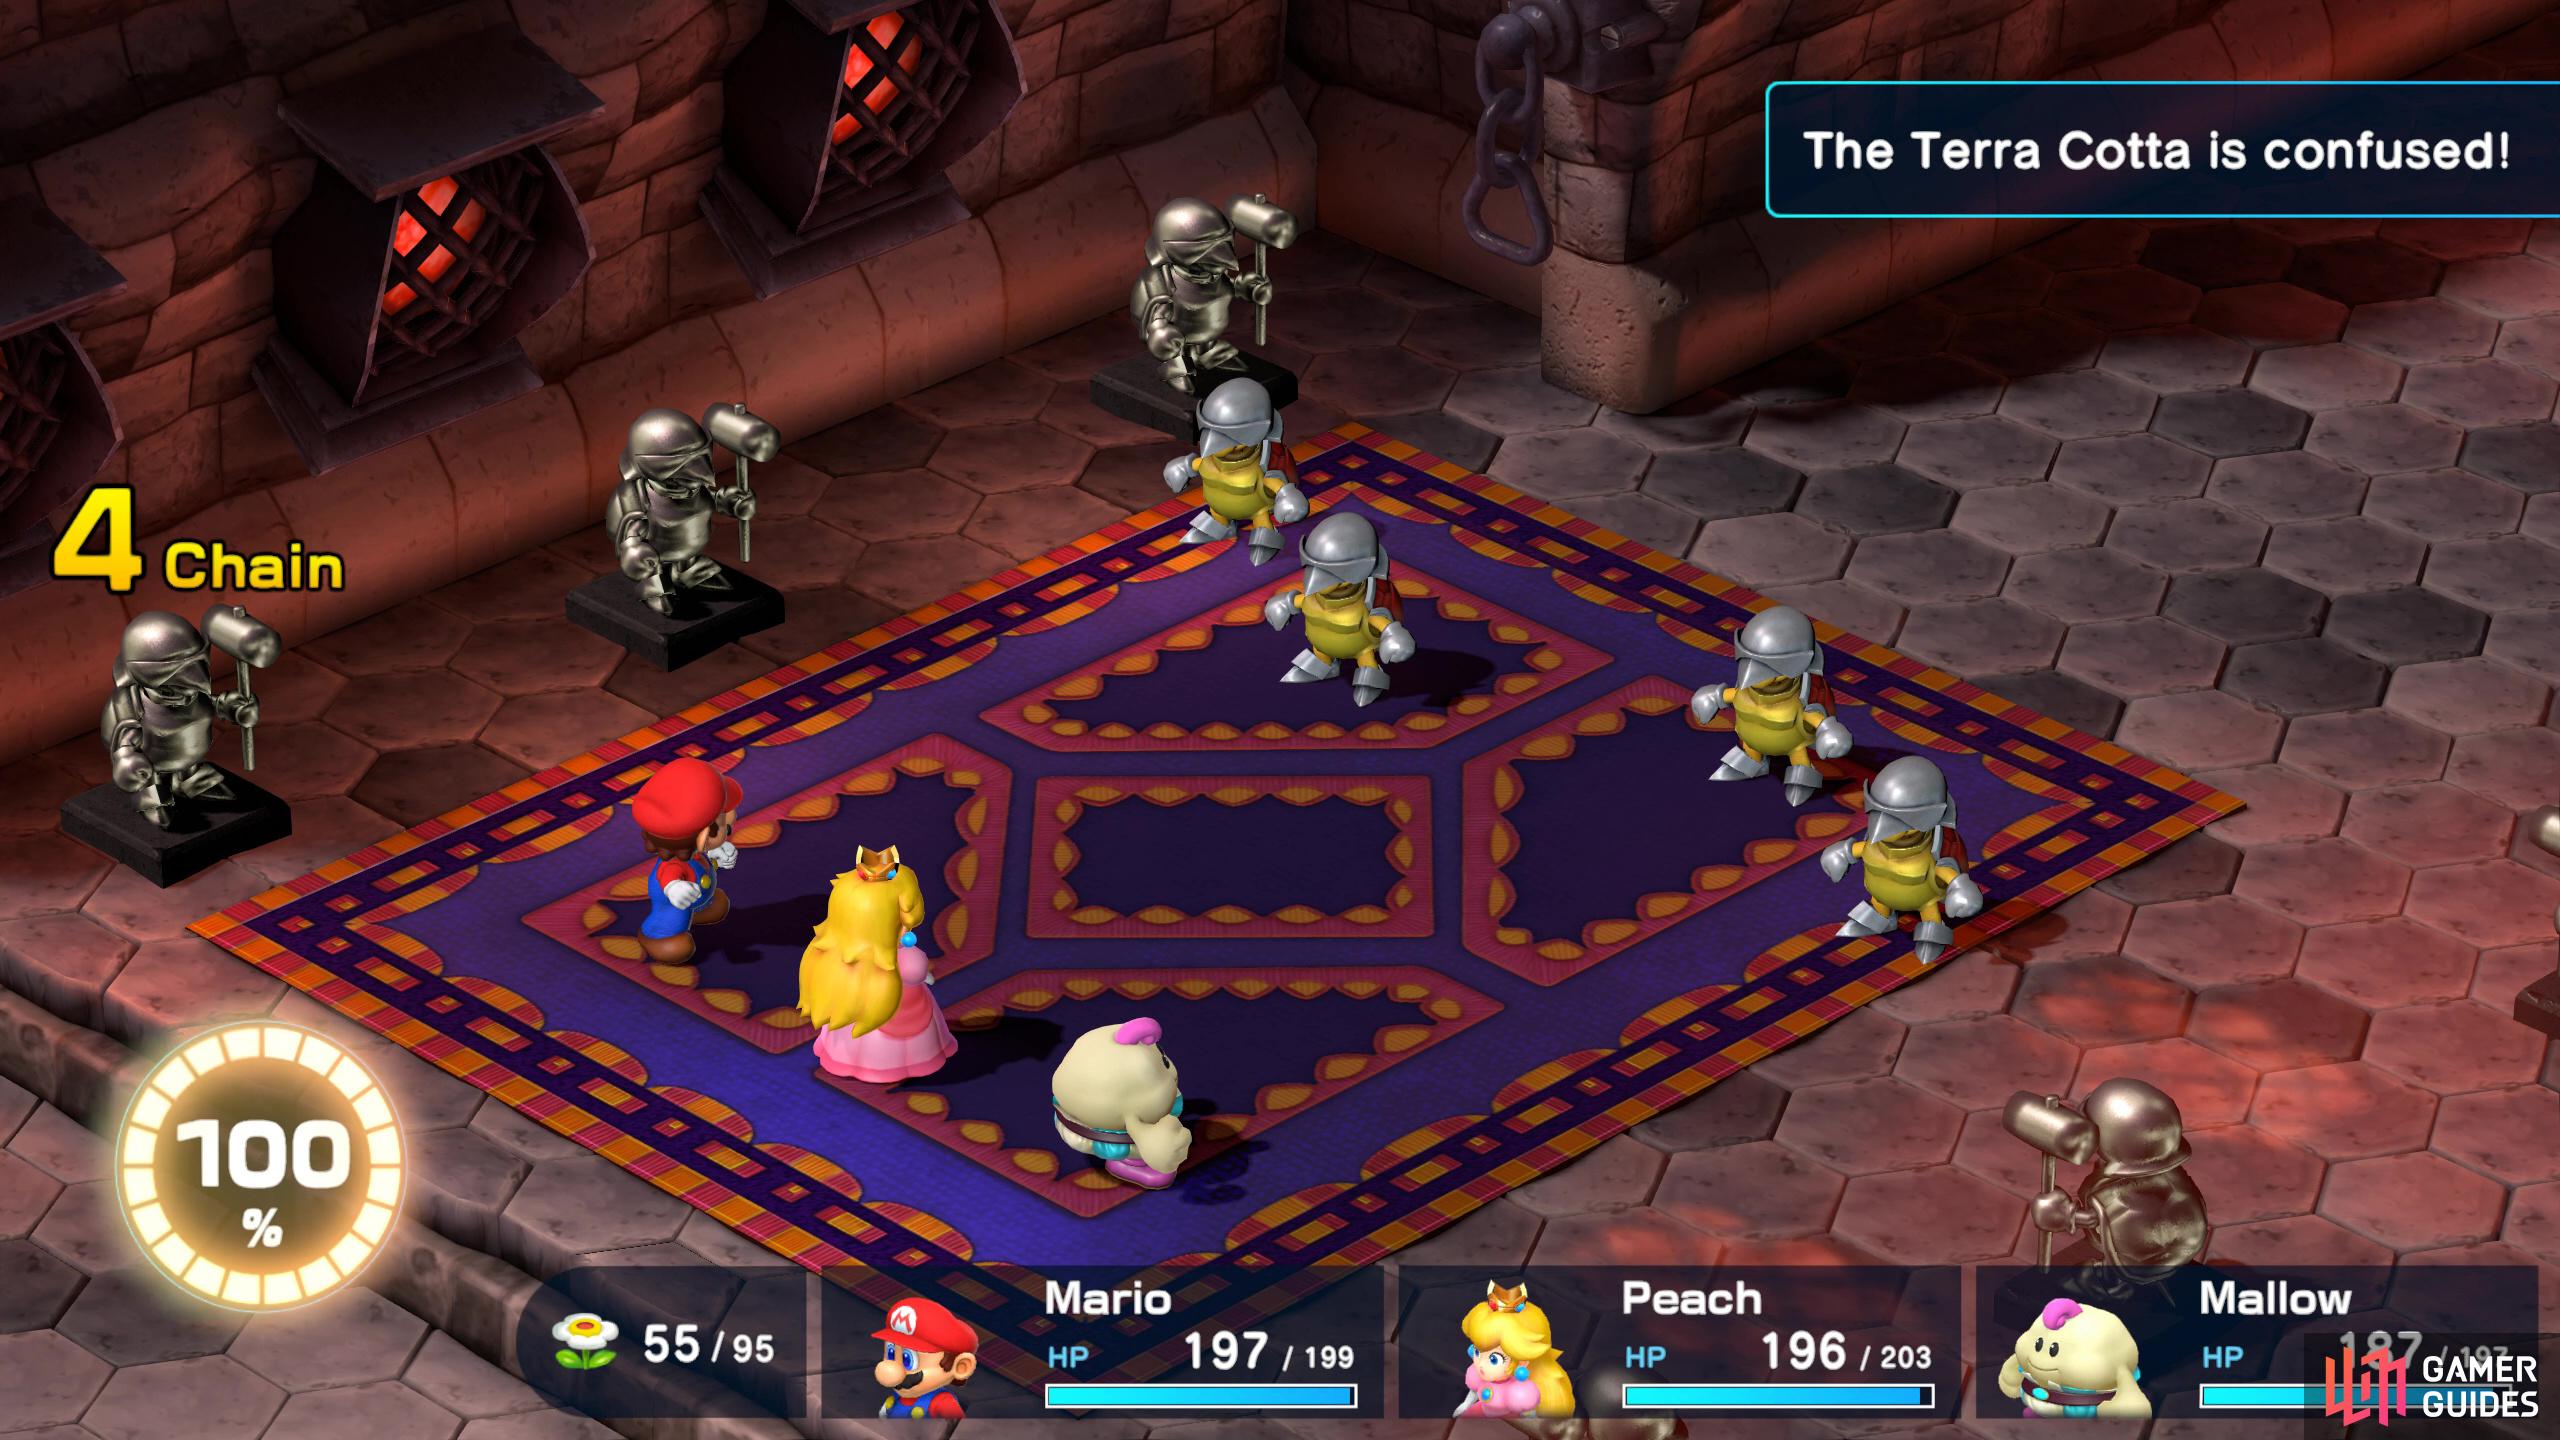 Keep trying the six doors in Bowser's Keep until you fight the Terra Cottas first. 